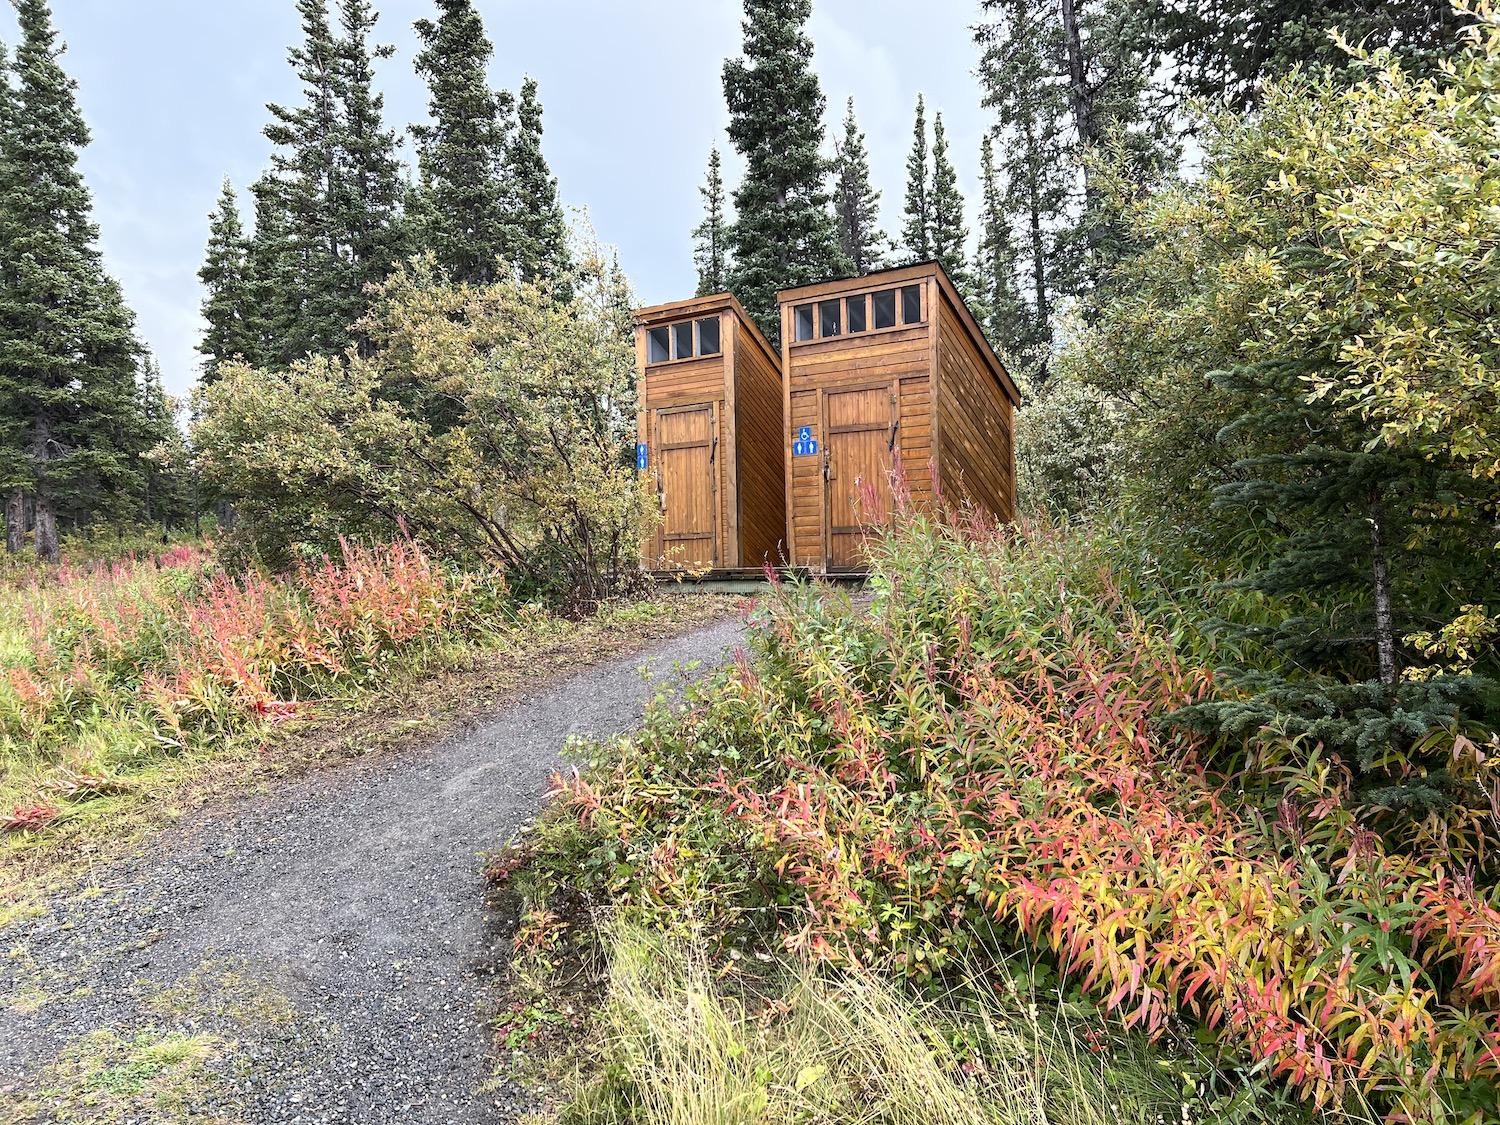 Gorgeous fall foliage surrounds the outhouses at Kathleen Lake at Kluane National Park and Reserve.